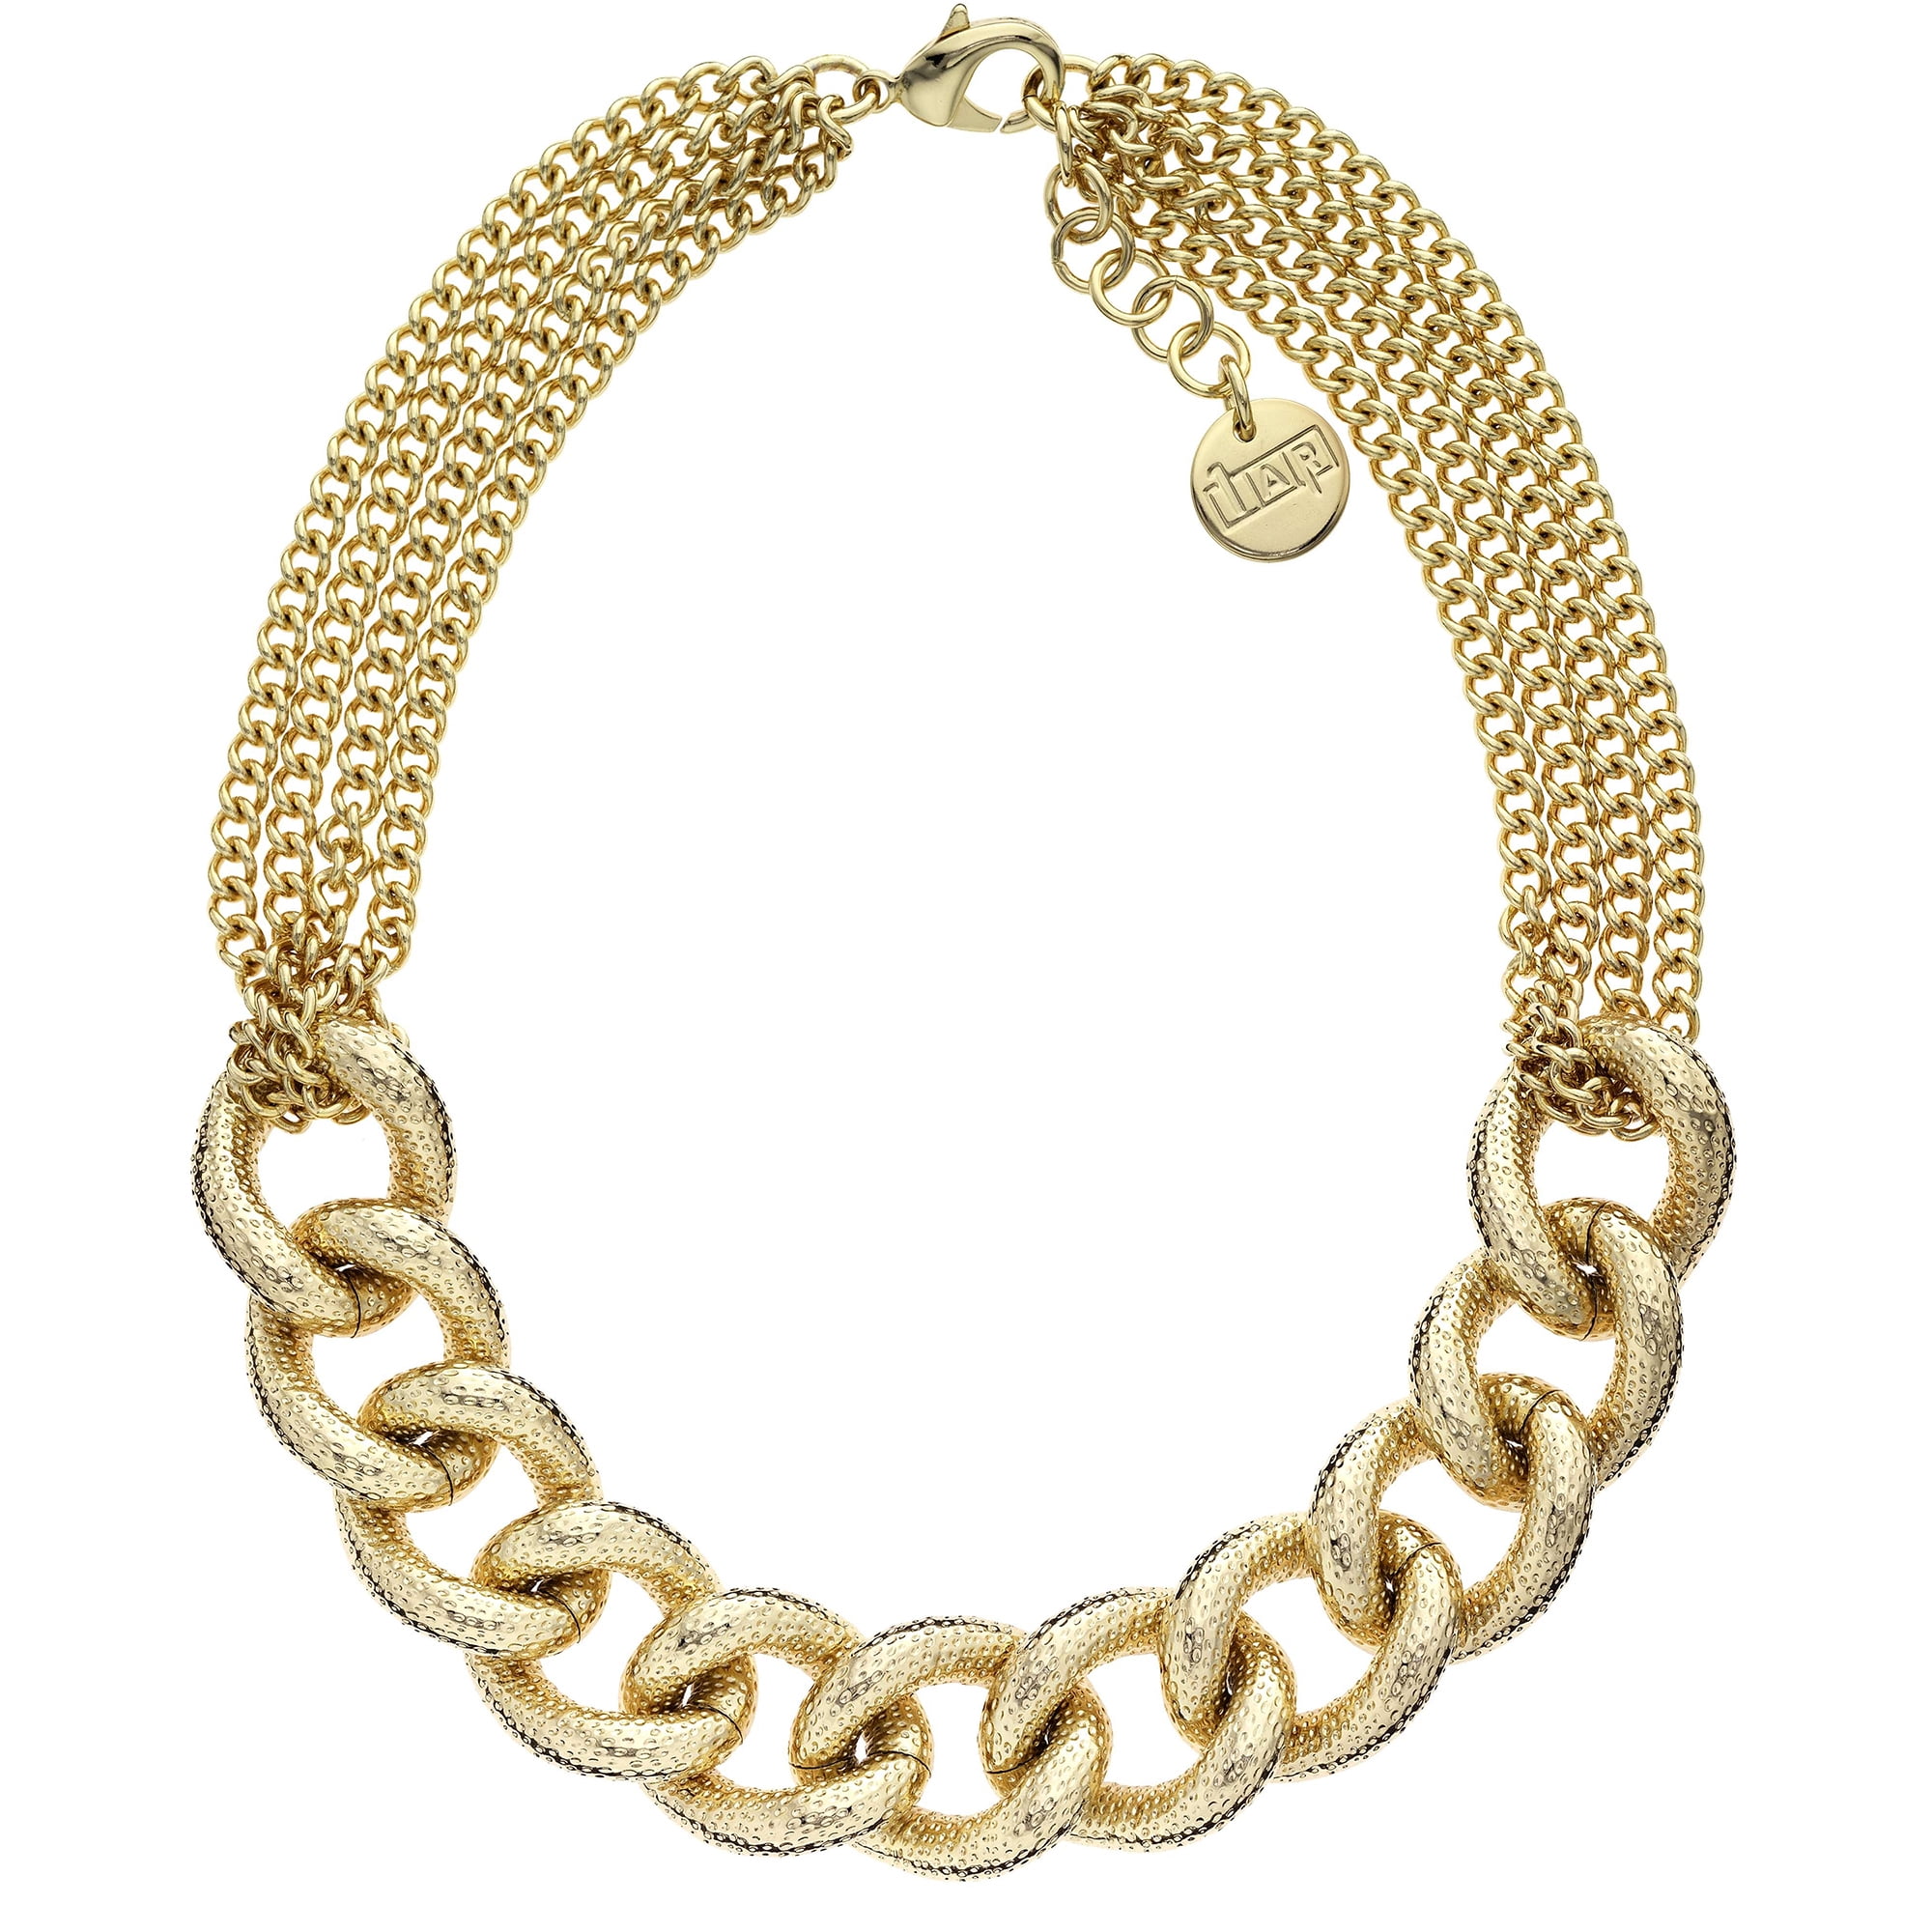 X & O 18KT GEP Glitter Textured Link and Chain Necklace - Walmart.com